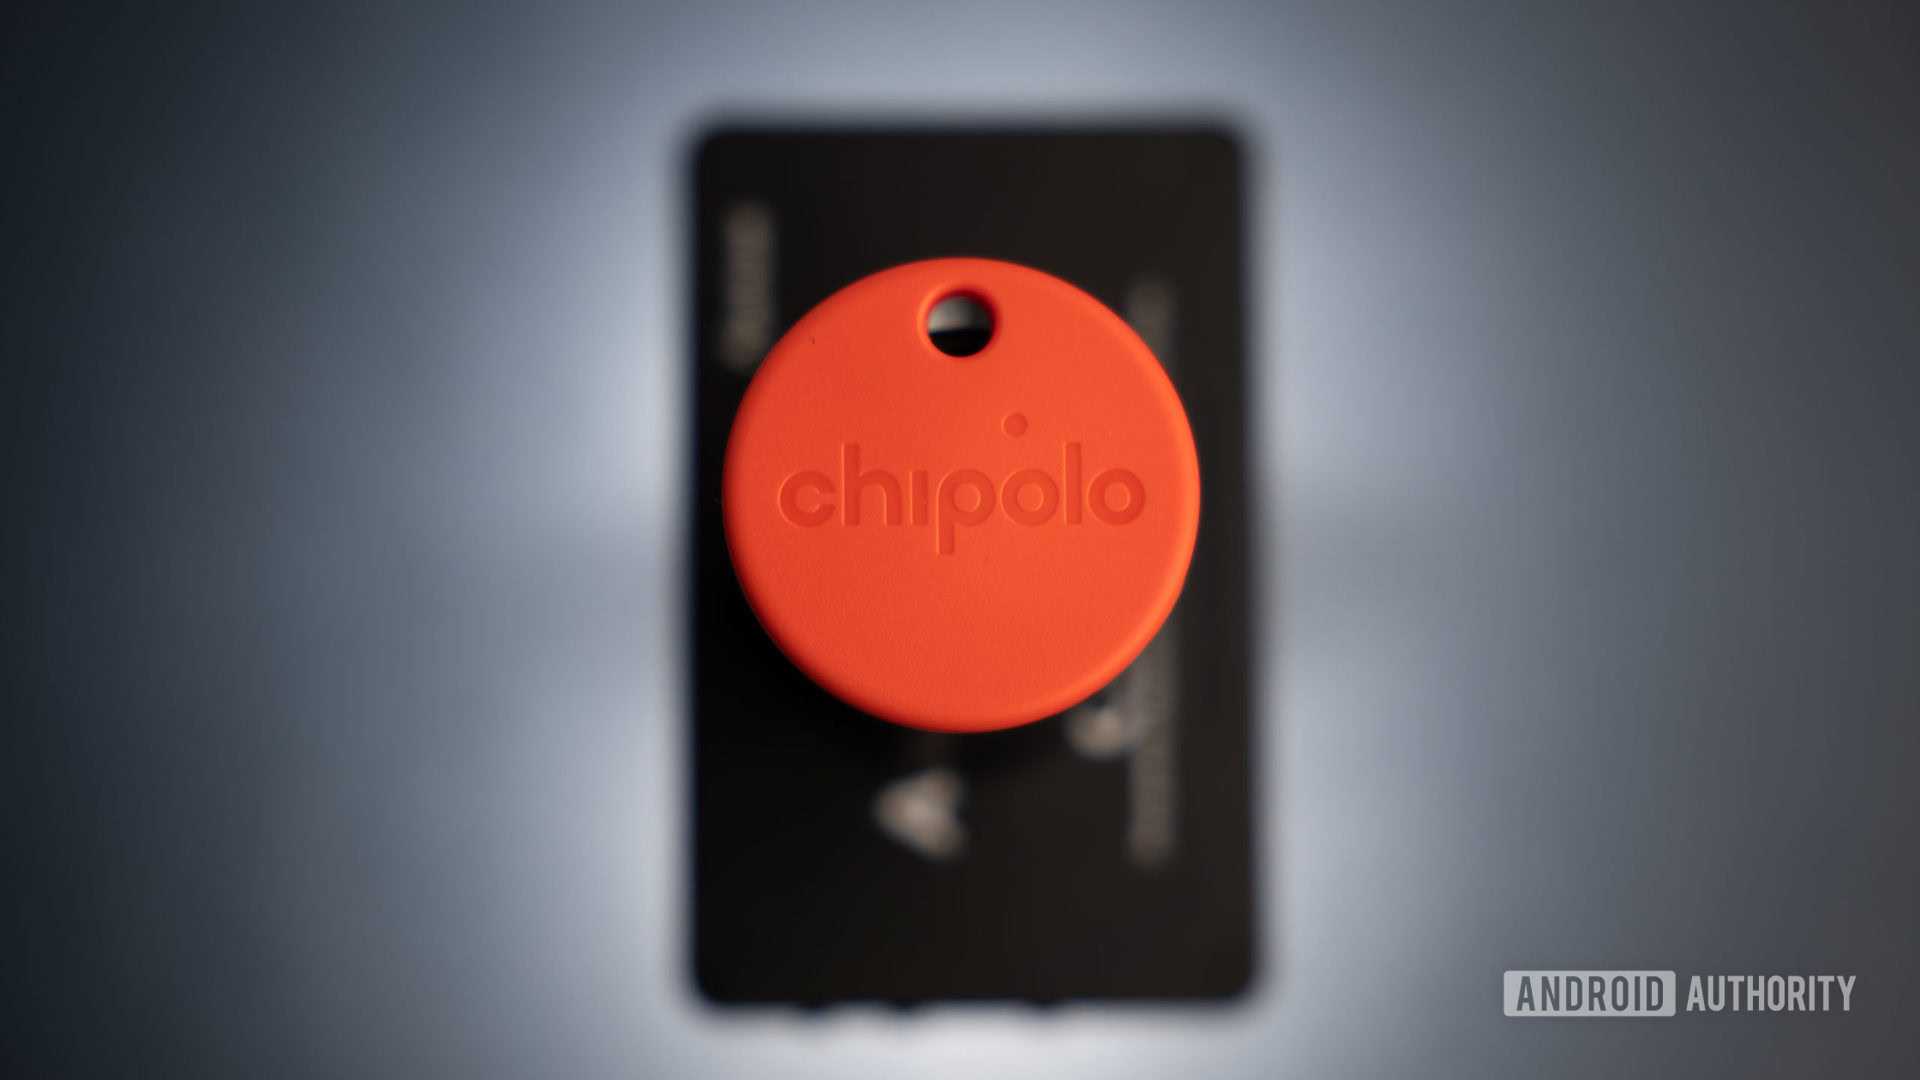 https://www.androidauthority.com/wp-content/uploads/2021/07/Chipolo-Tracker-11-scaled.jpg